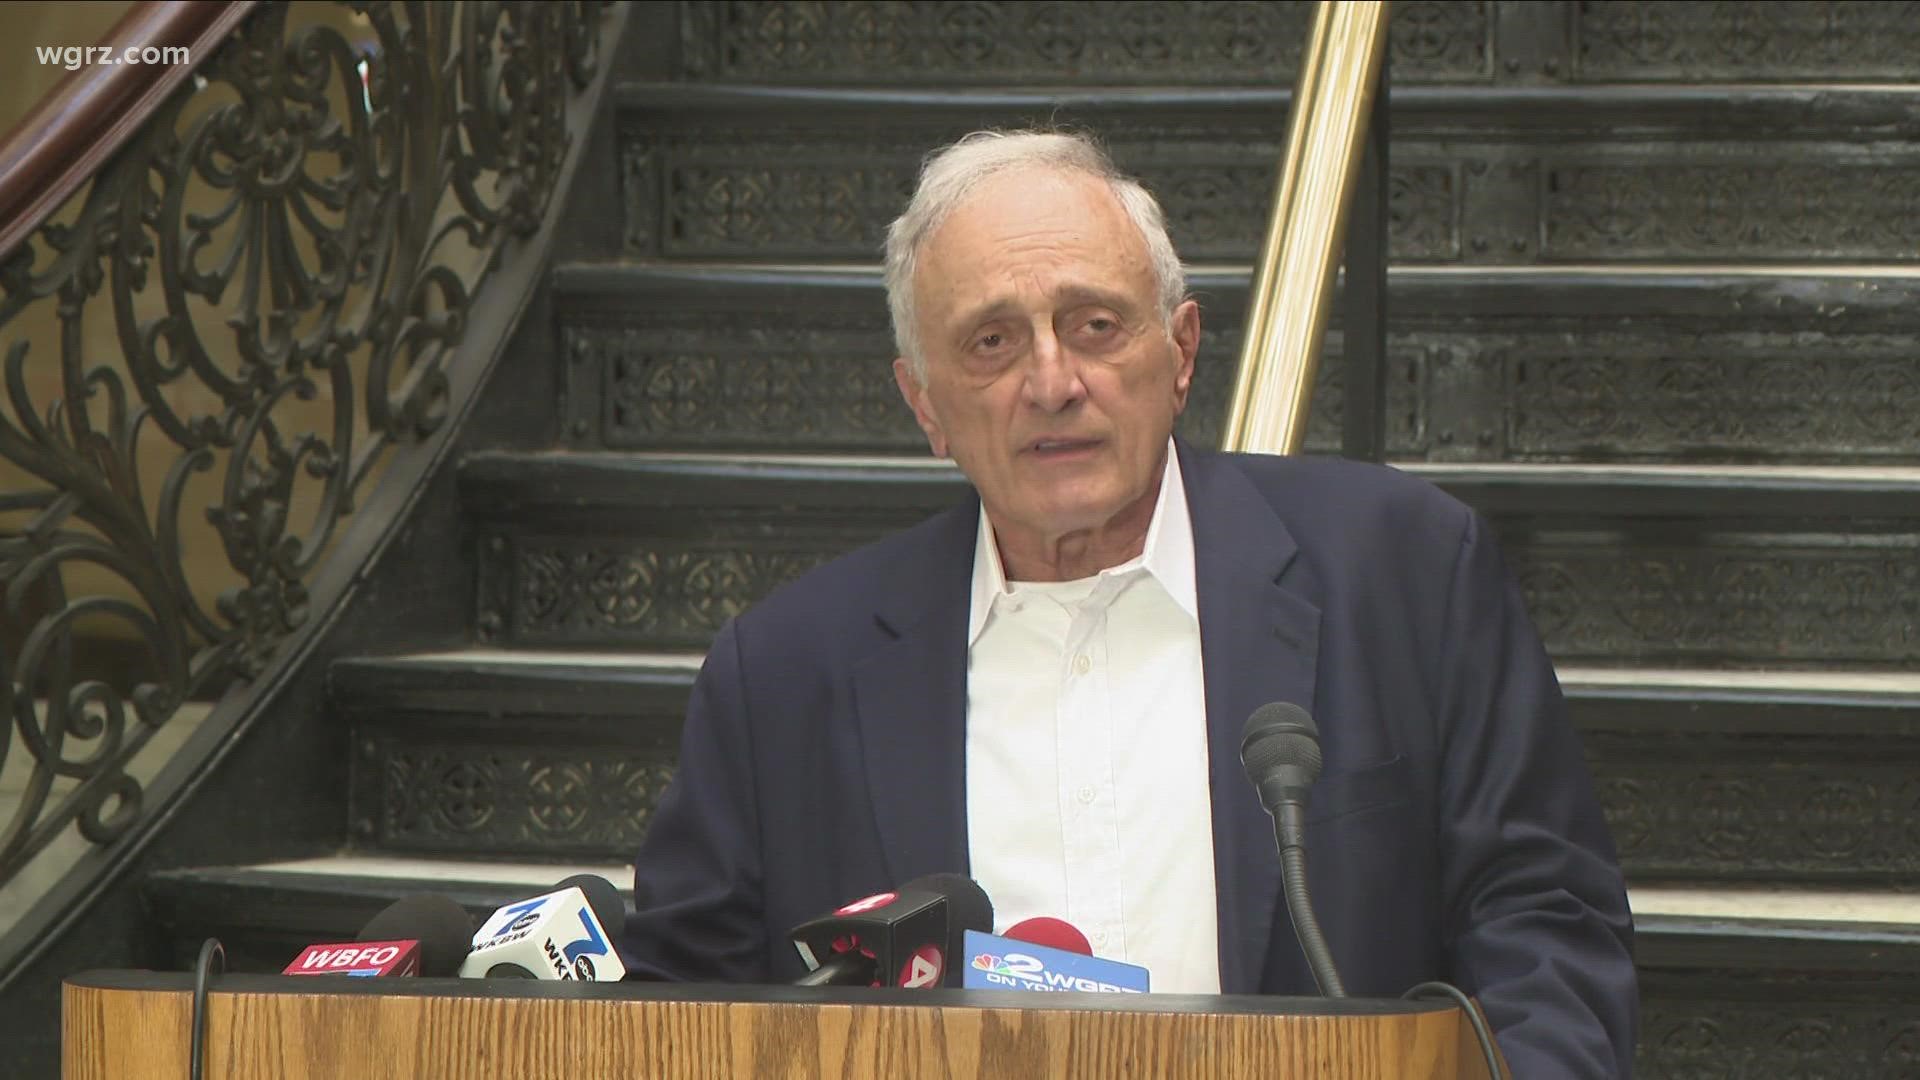 23rd Congressional district candidate Carl Paladino plans to file a lawsuit against Governor Kathy Hochul New York's recently passed gun reforms.